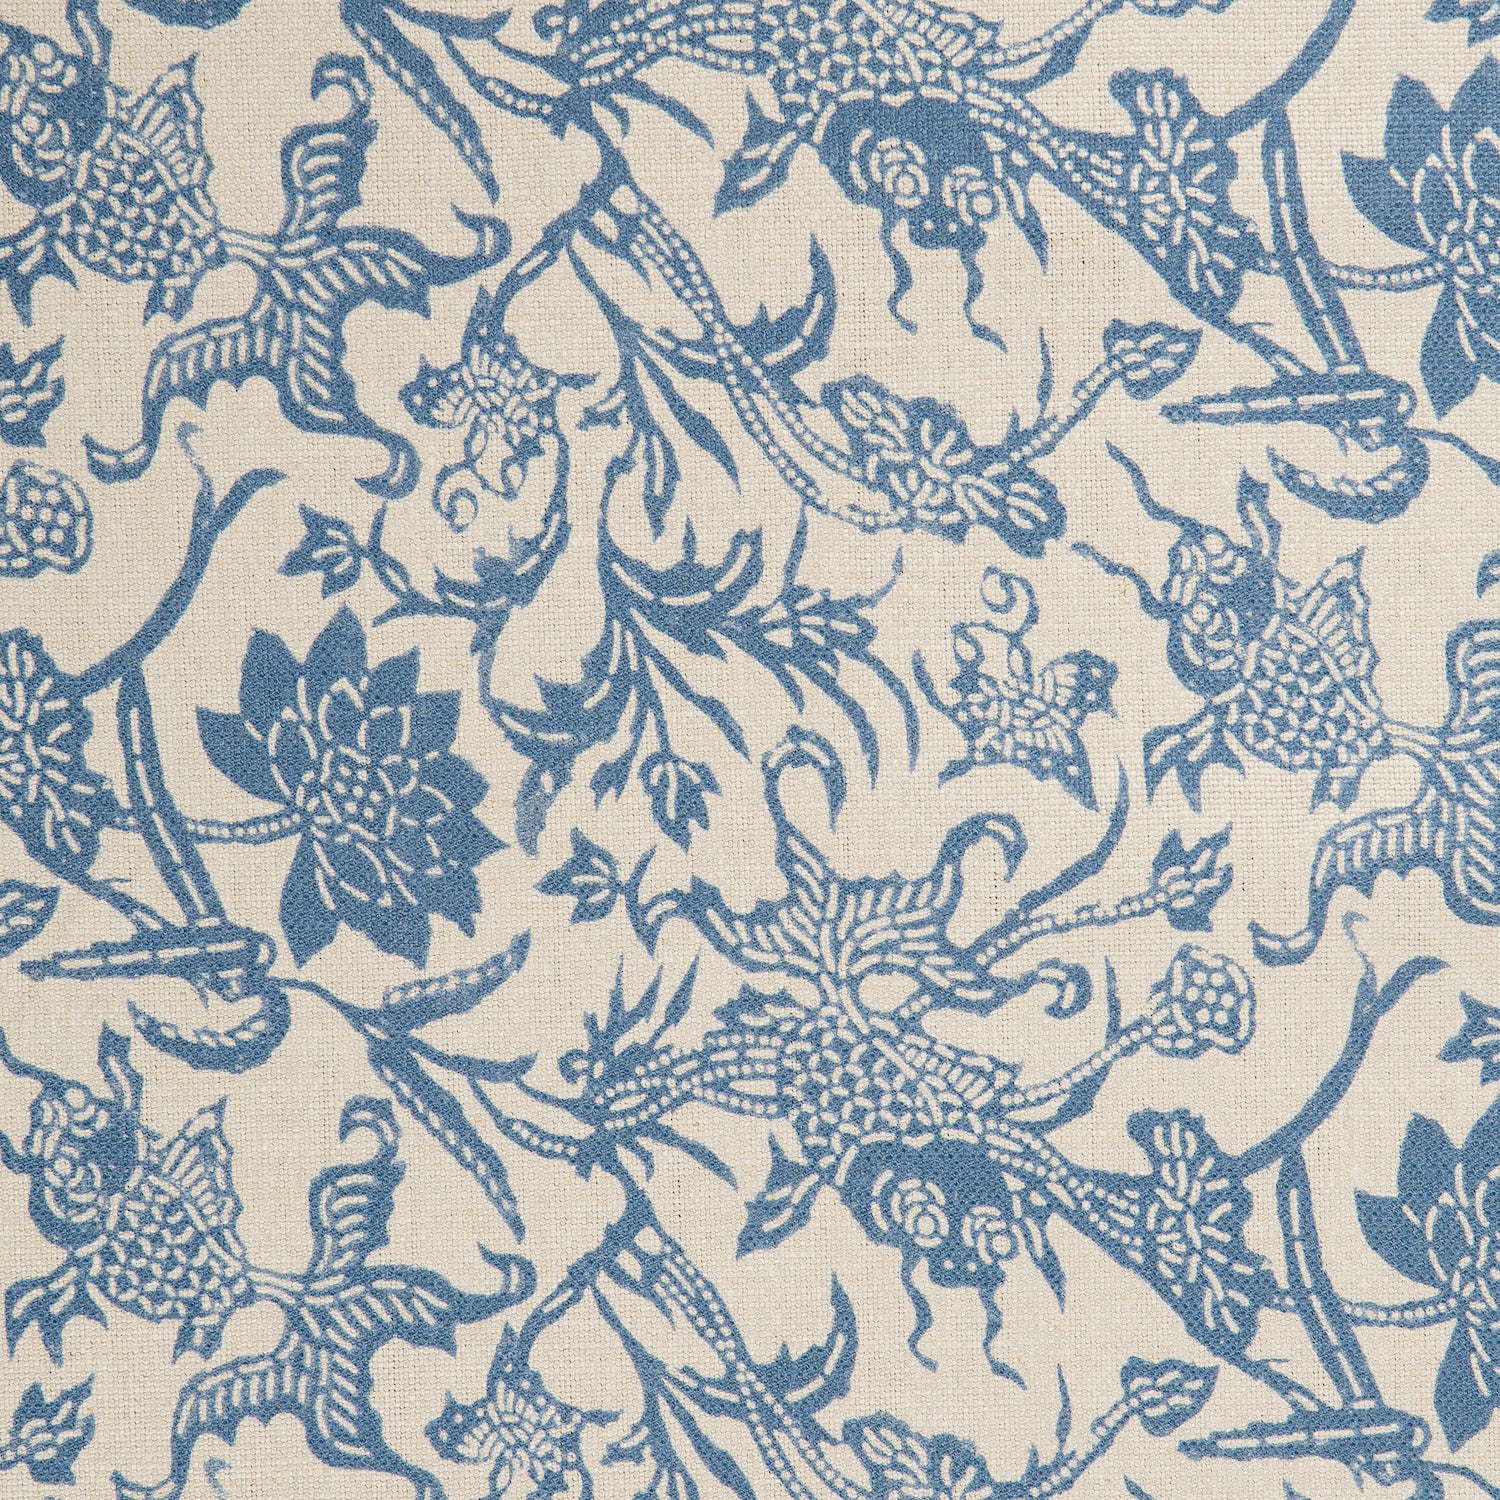 Detail of a linen fabric in a carp and leaf pattern in blue on a beige field.